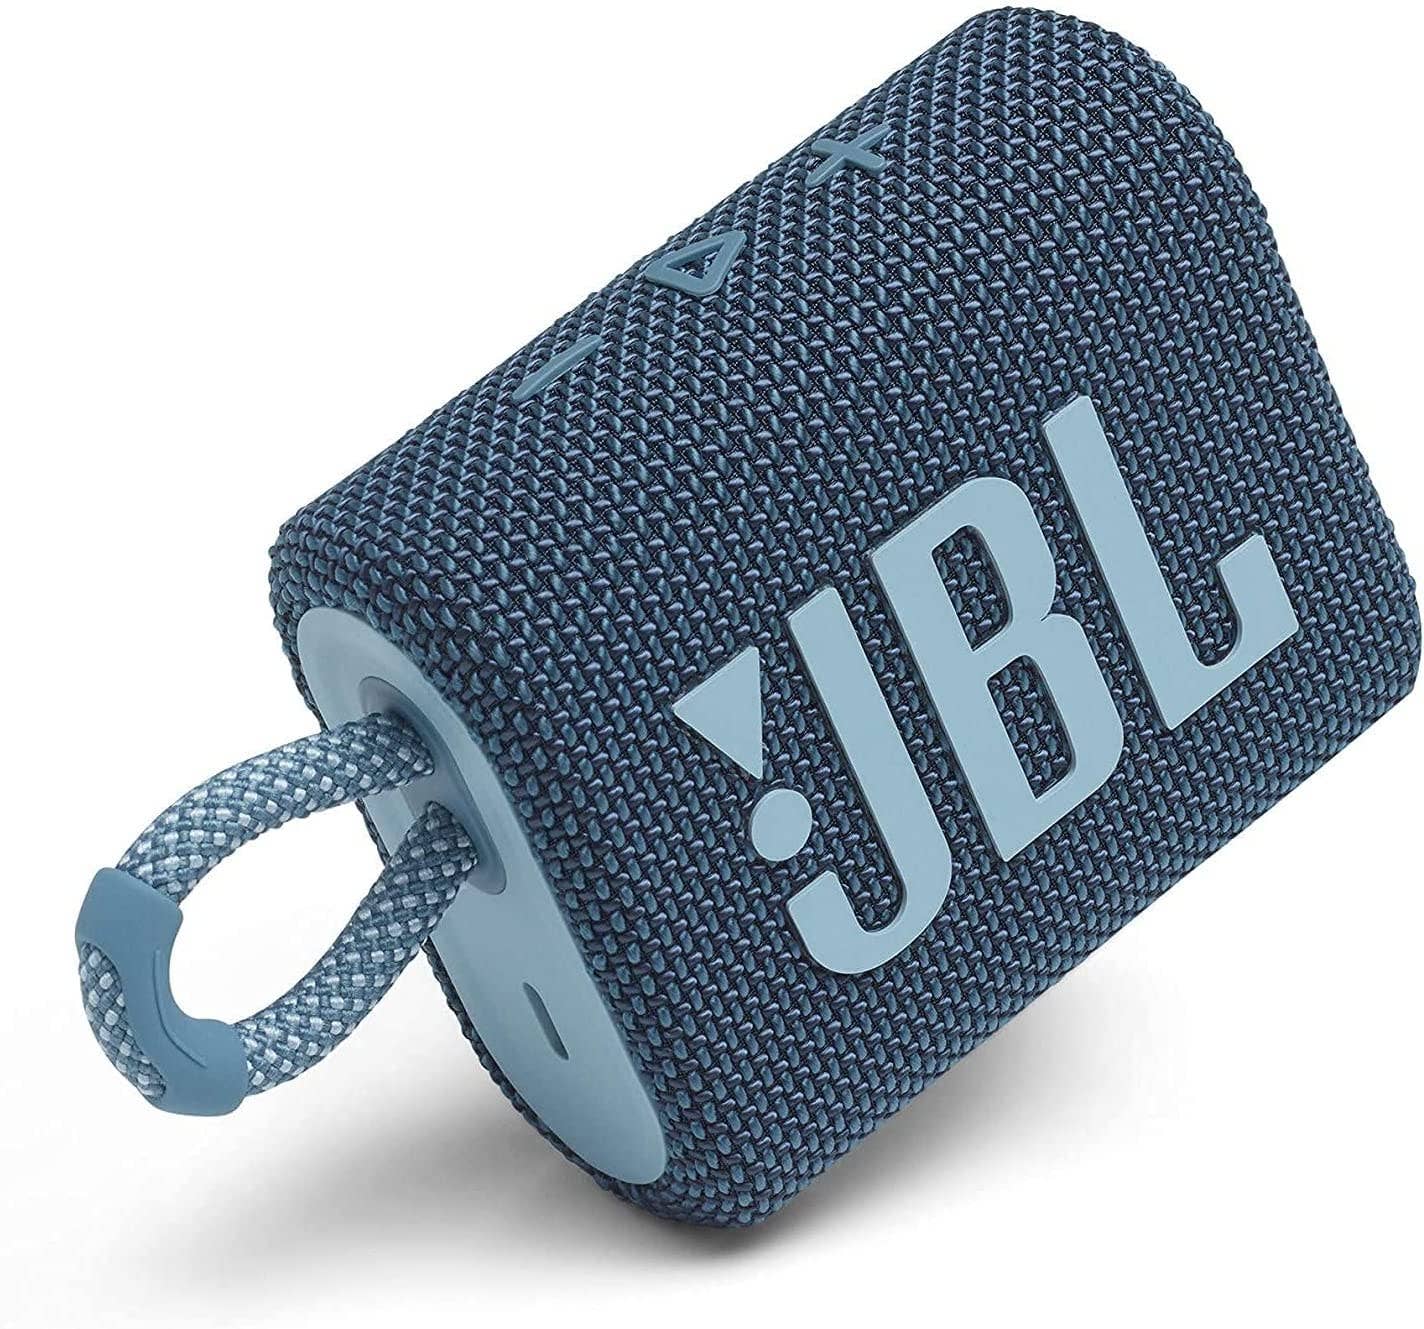 The device is stuffed inside the shell of a JBL Go 3 portable speaker.